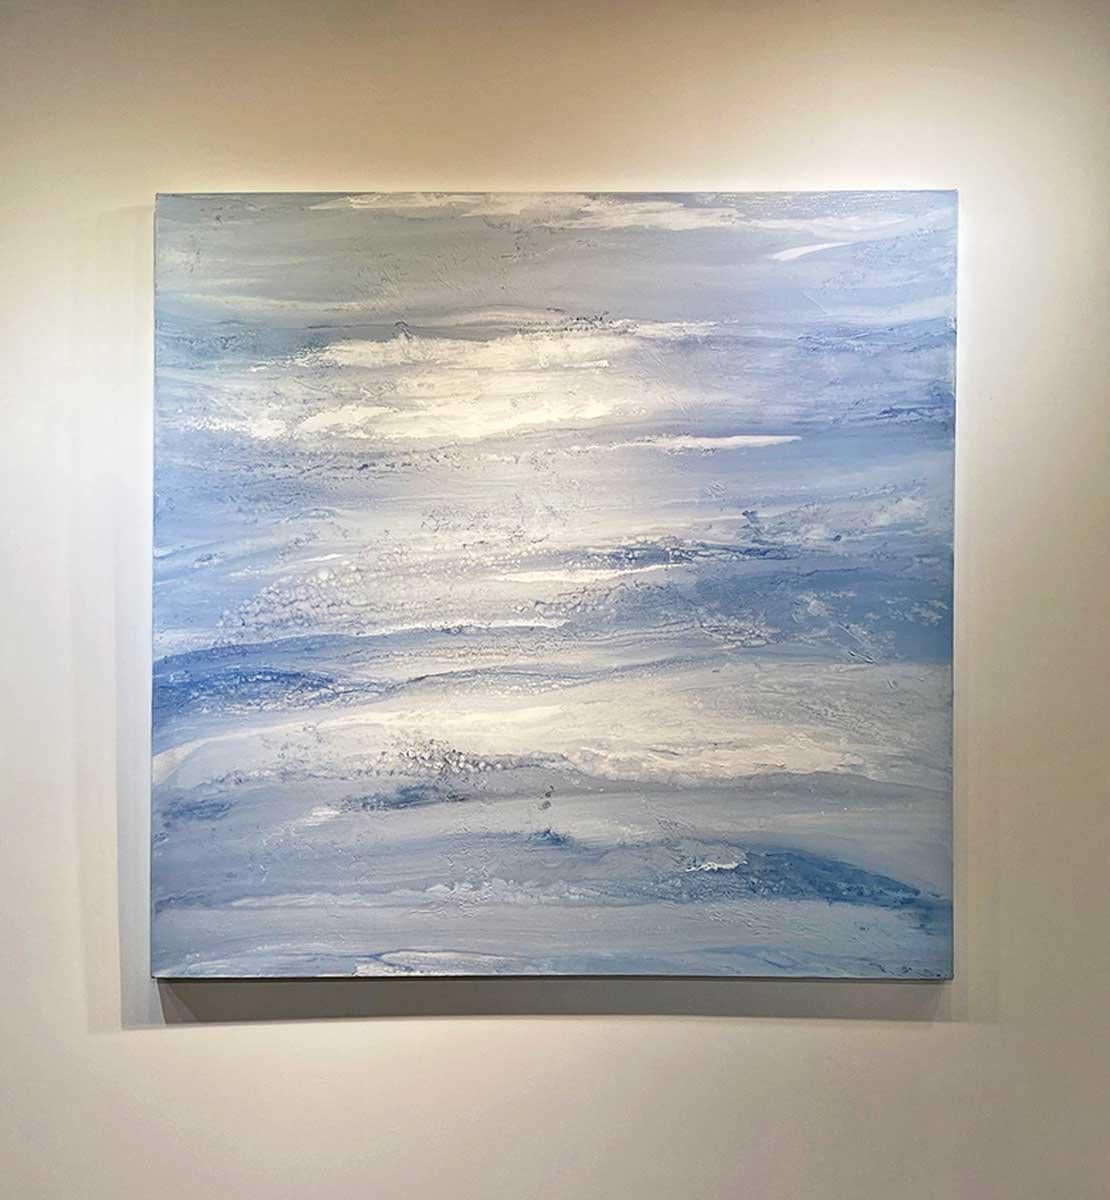 Abstract, contemporary, nautical, smoky, gray, navy, blue, silver, layers, texture, Pat Steir, minimalist, abstracted, minimalism

ABOUT TEODORA GUERERRA

BIOGRAPHY 

Teodora Guererra received her Bachelor of Arts in Art Education with a minor in